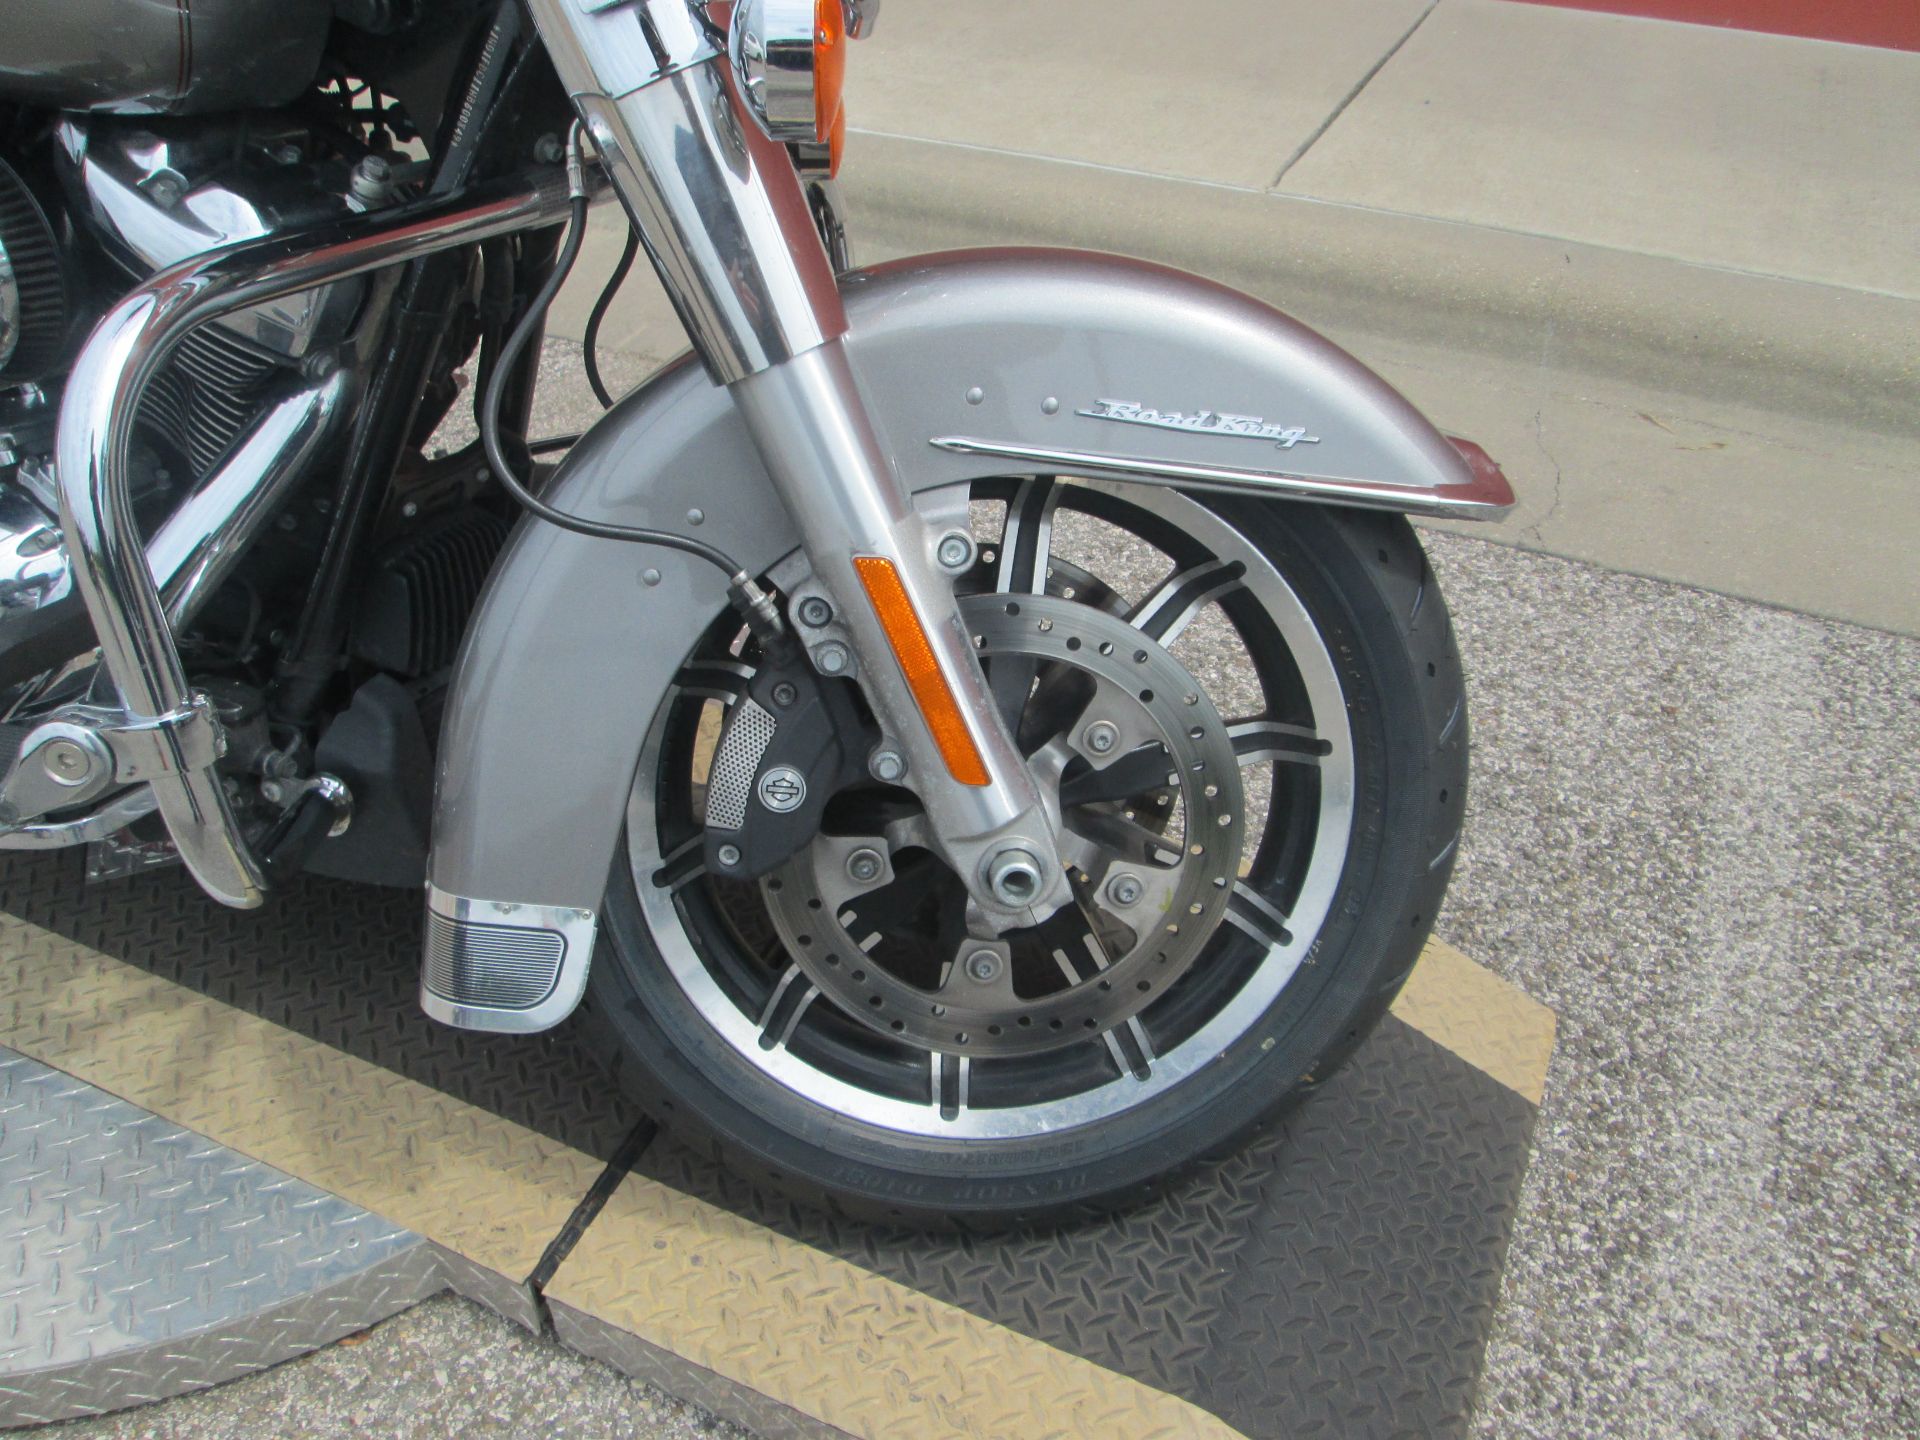 2017 Harley-Davidson Road King® in Temple, Texas - Photo 5